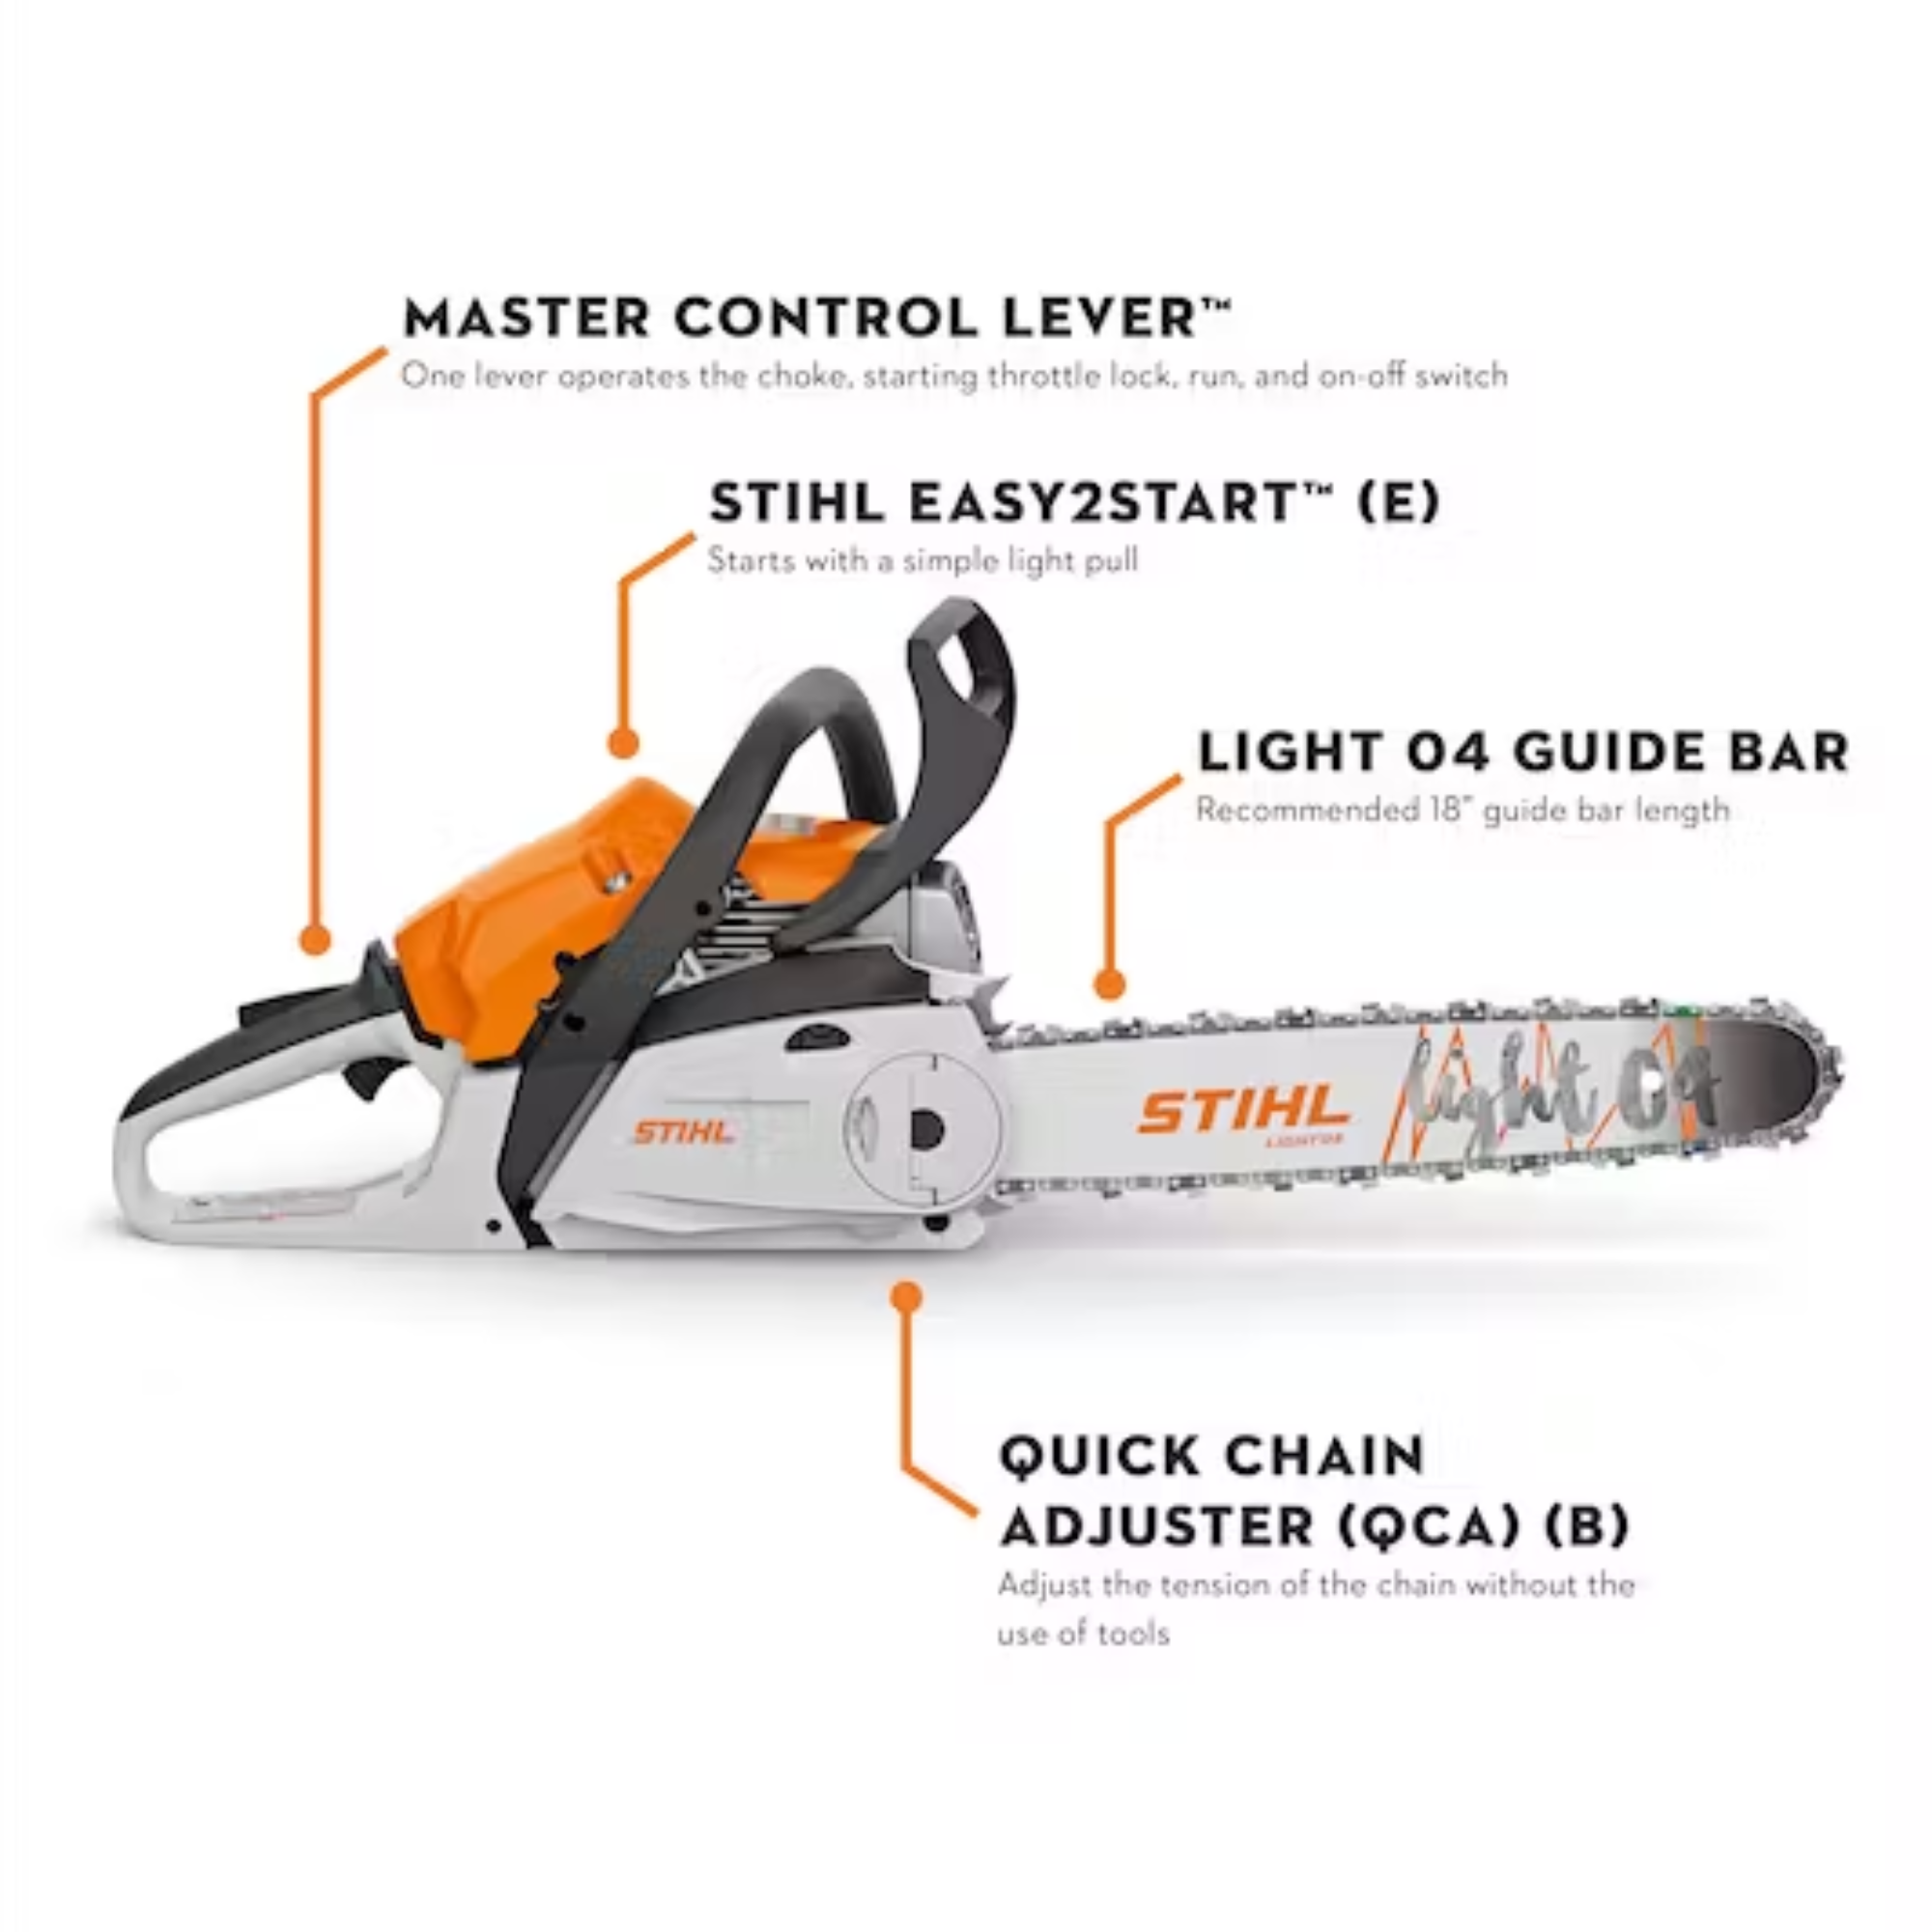 Homeowner Chainsaws - Mid Range Chainsaw Features